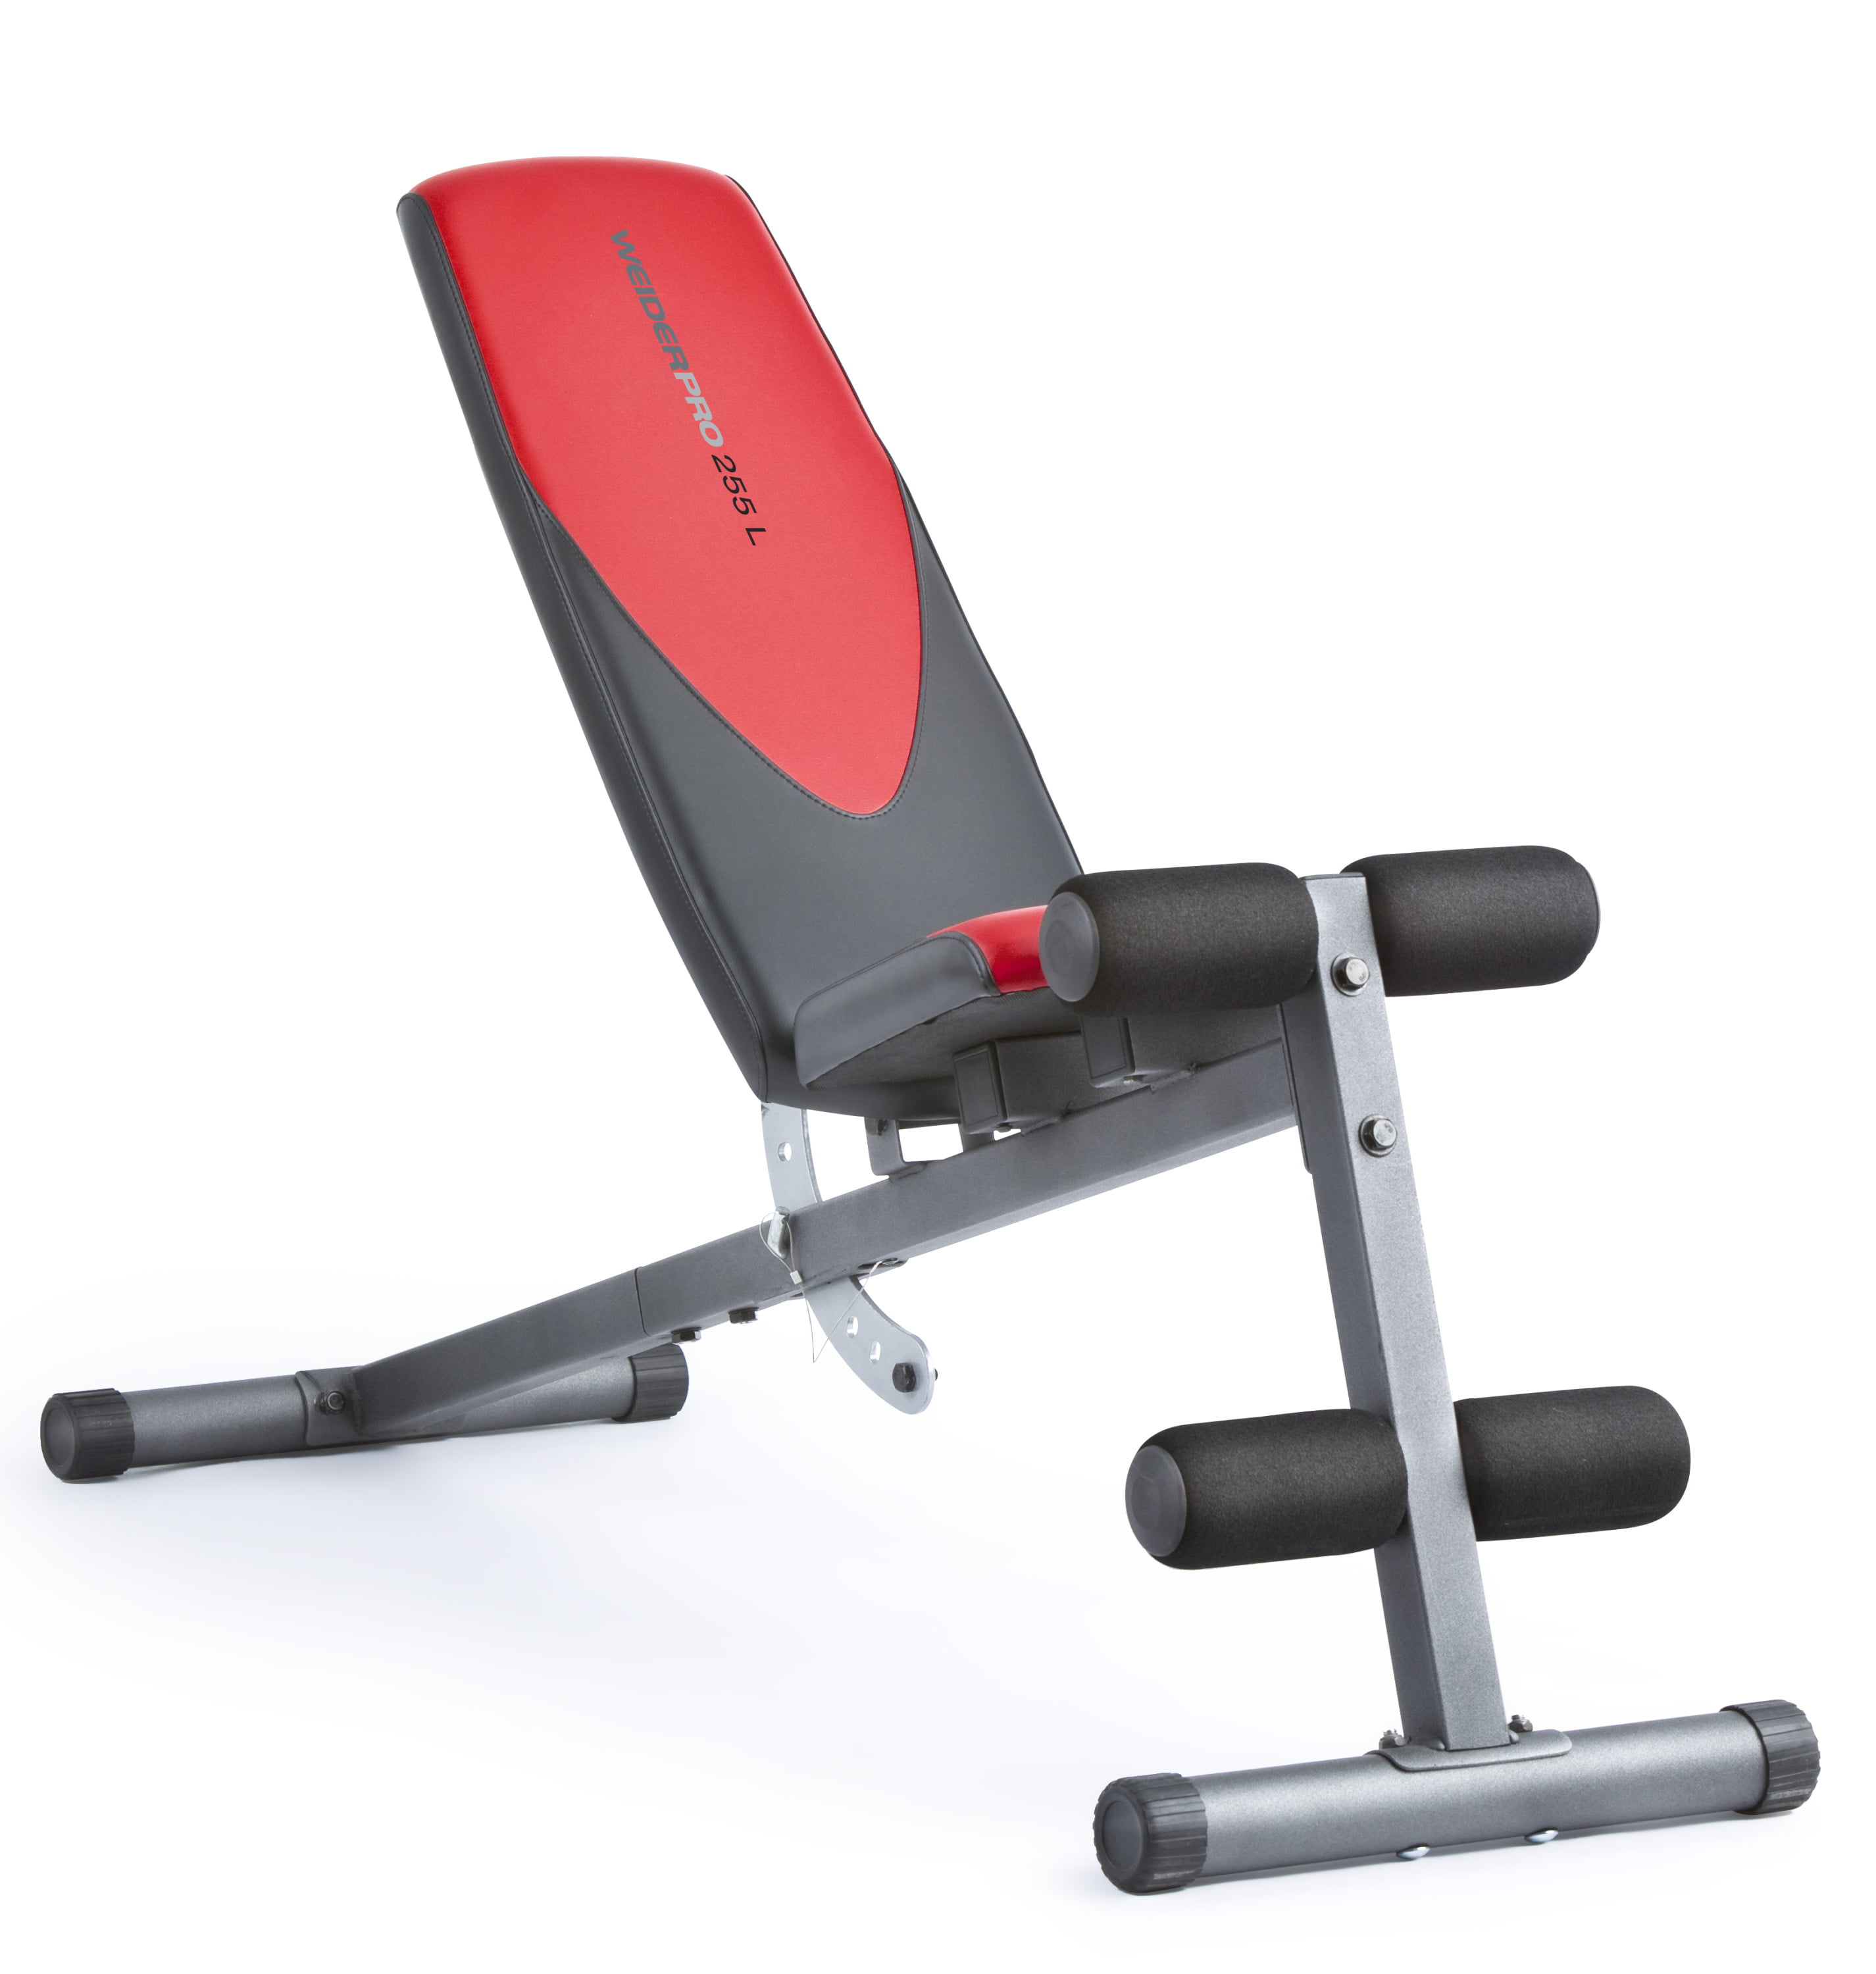 Weider WEBE49310 Incline Weight Bench for sale online 